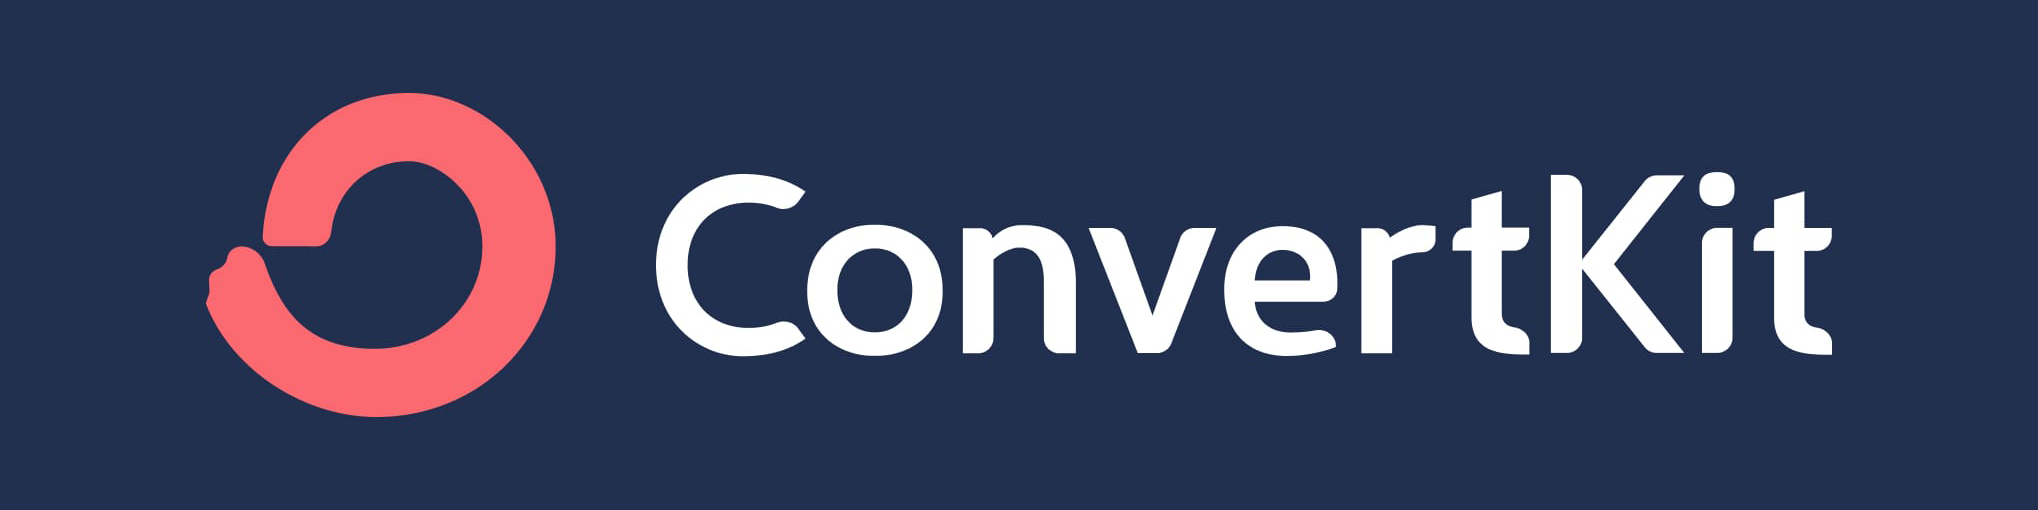 ConvertKit logo | Using Newsletters to Market Telehealth | Brighter Vision | Marketing Blog for Therapists